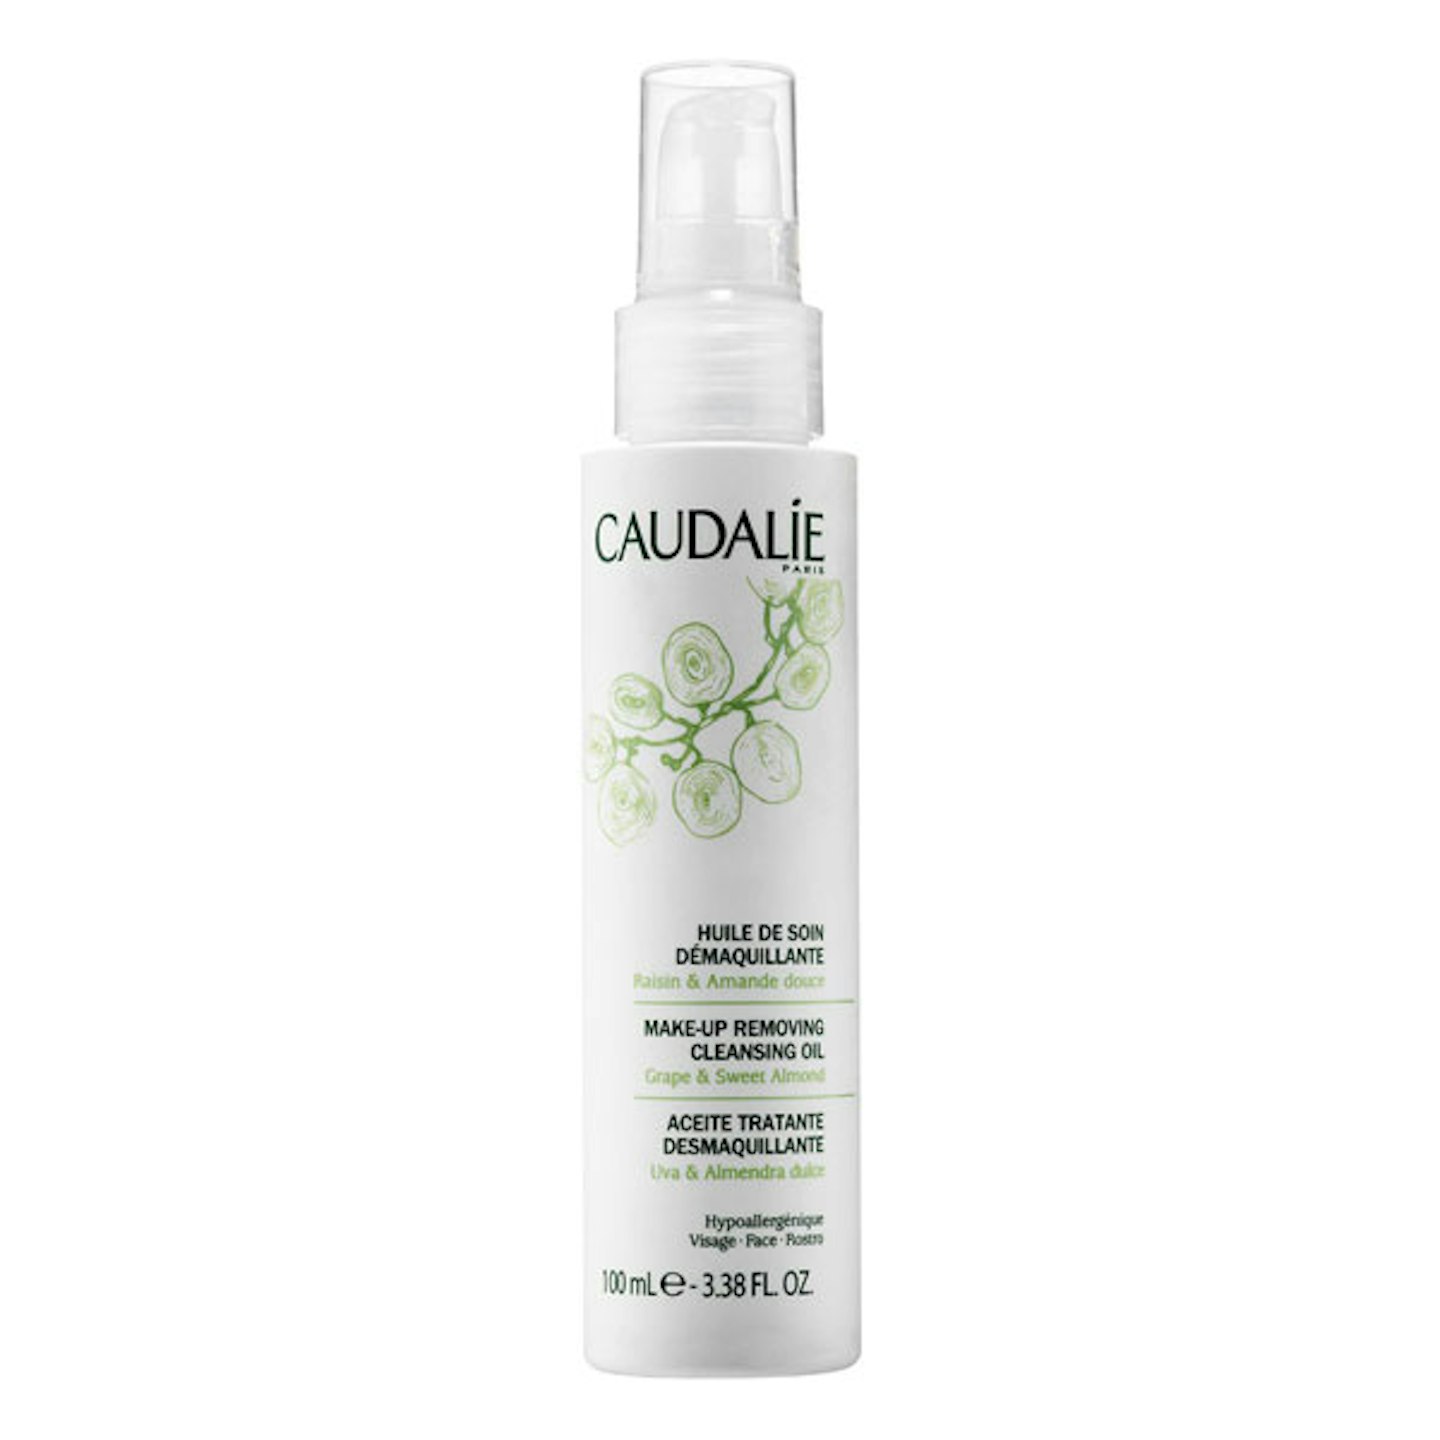 Caudalie Make Up Removing Cleansing Oil, £18